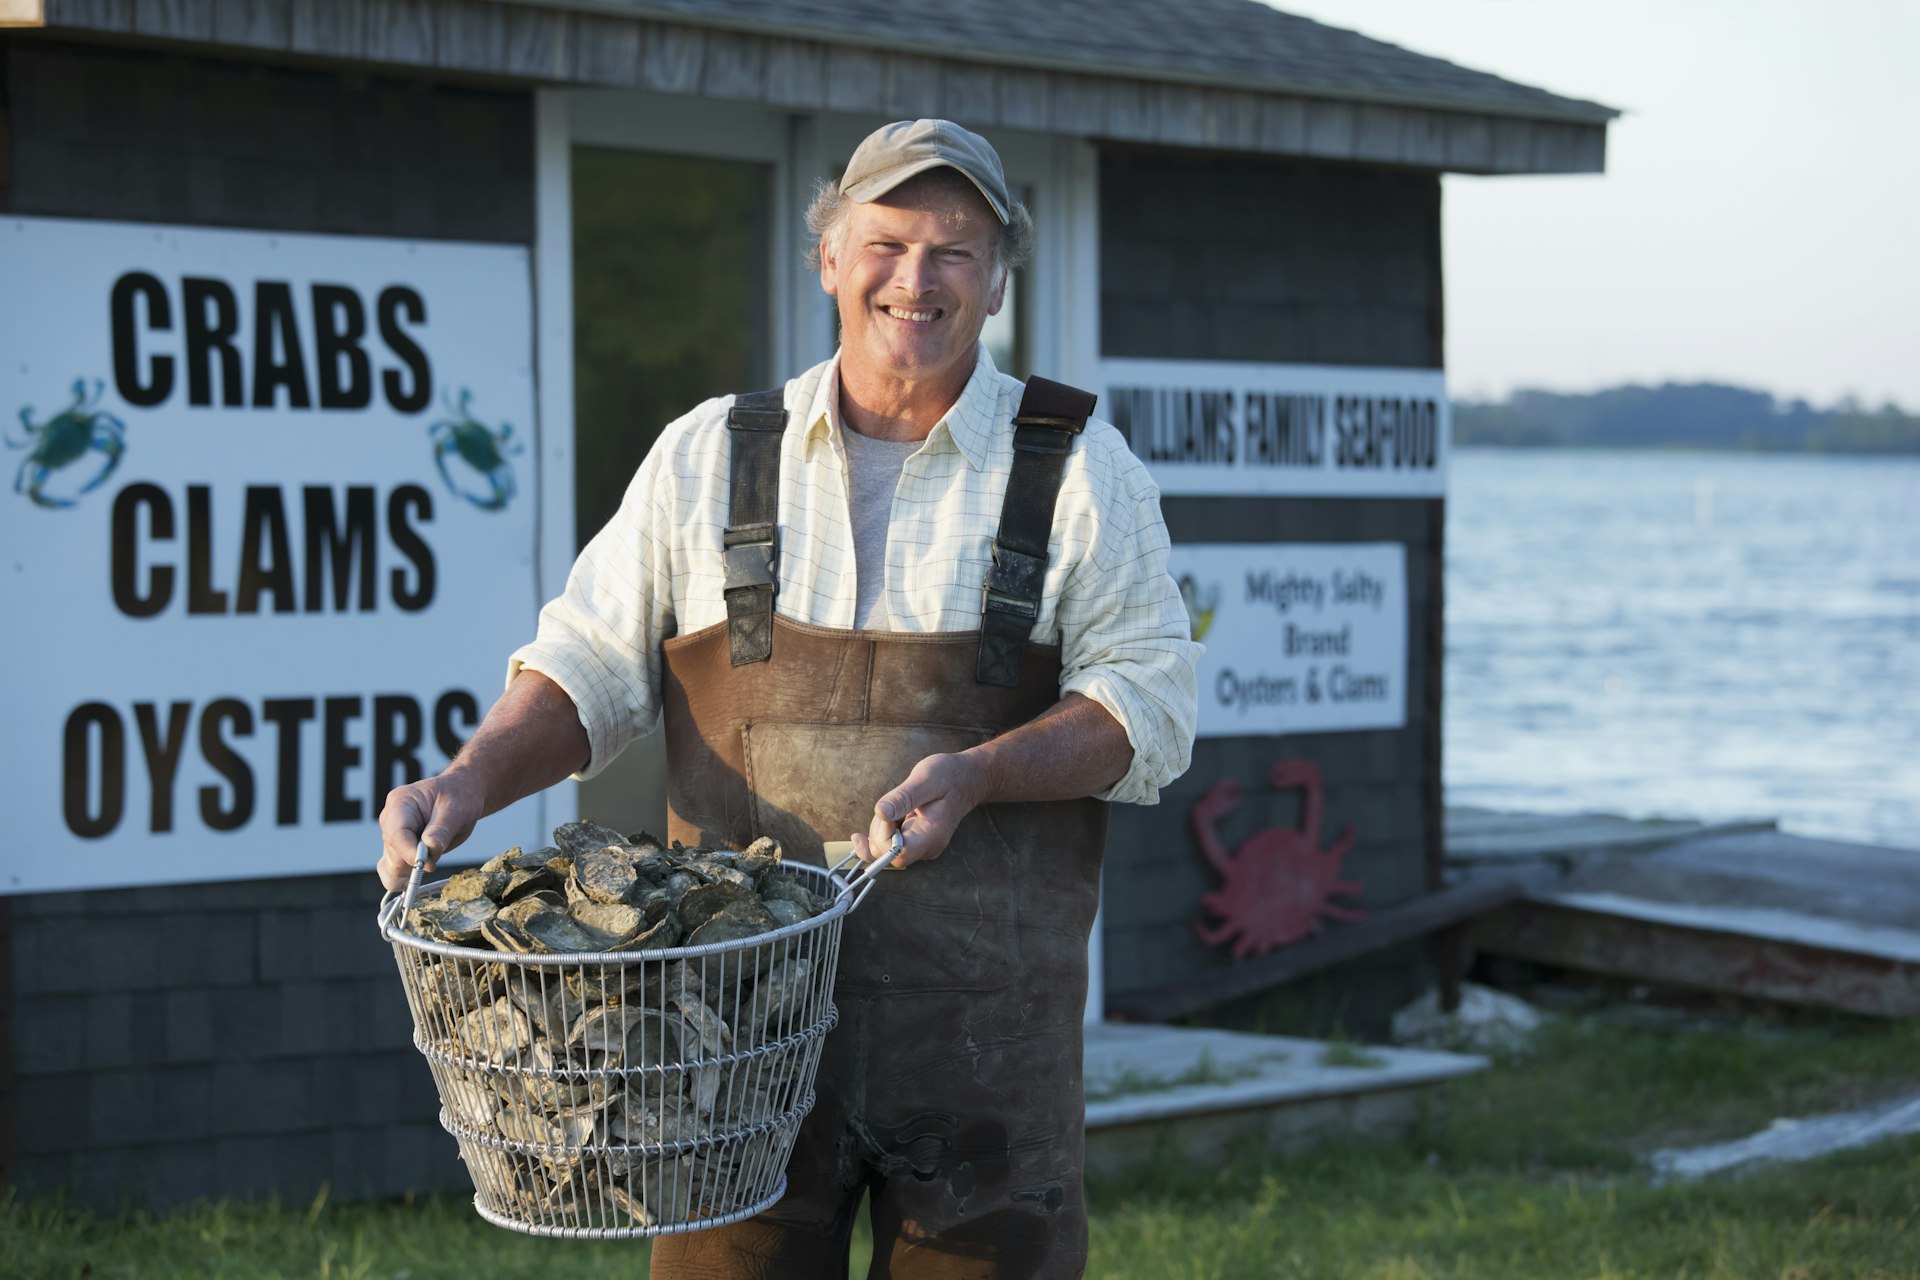 Fisherman holding basket of oysters